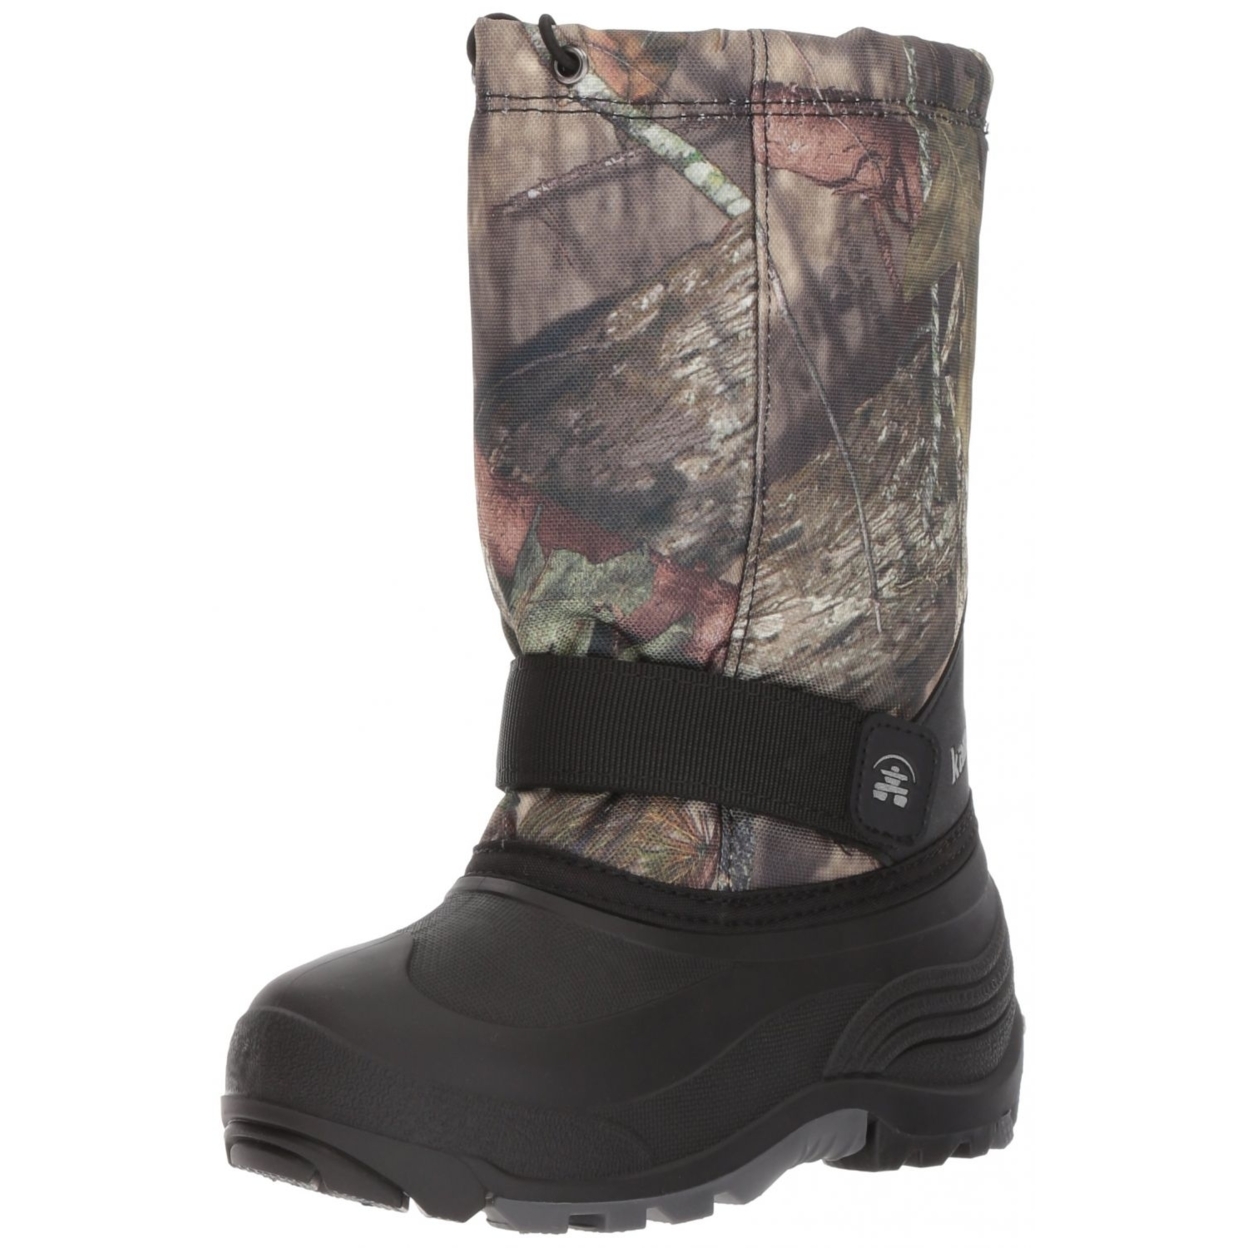 Kamik Rocket Cold Weather Boot (Toddler/Little Kid/Big Kid) 9 Toddler MOSSY OAK COUNTRY CAMO - MOSSY OAK COUNTRY CAMO, 4 Big Kid